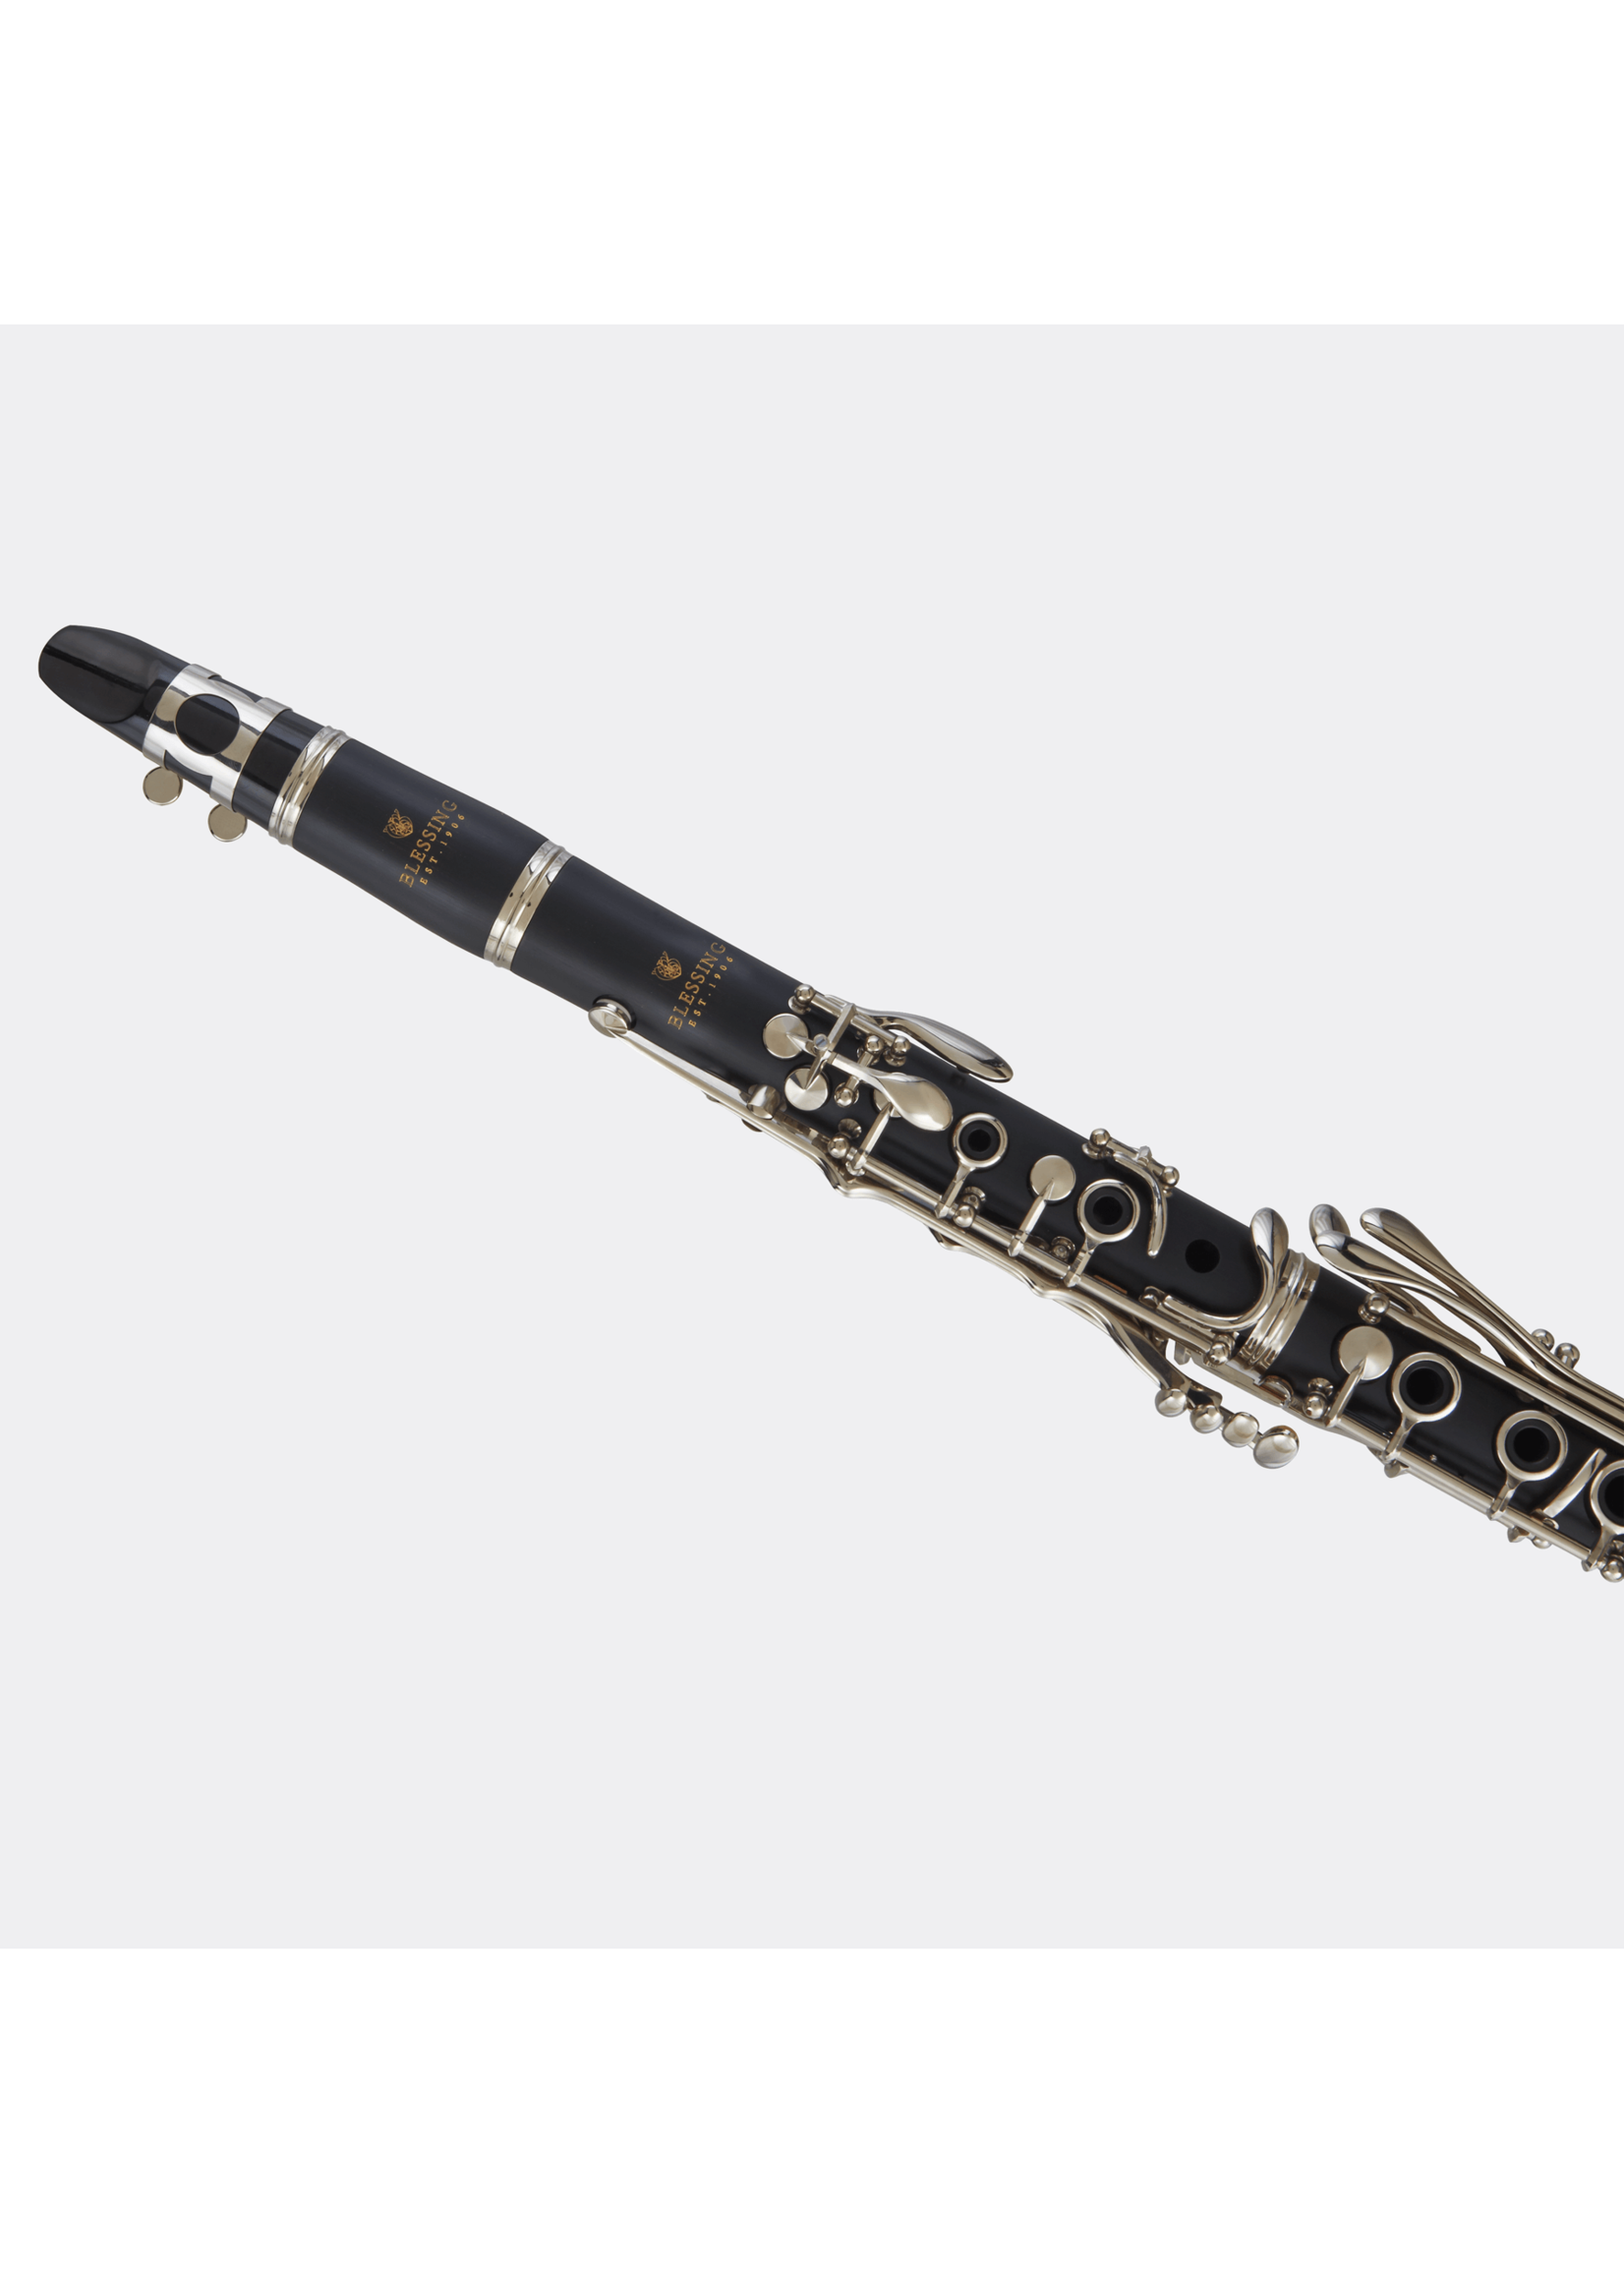 Blessing Blessing Bb Clarinet, ABS, Nickel Keys, Outfit